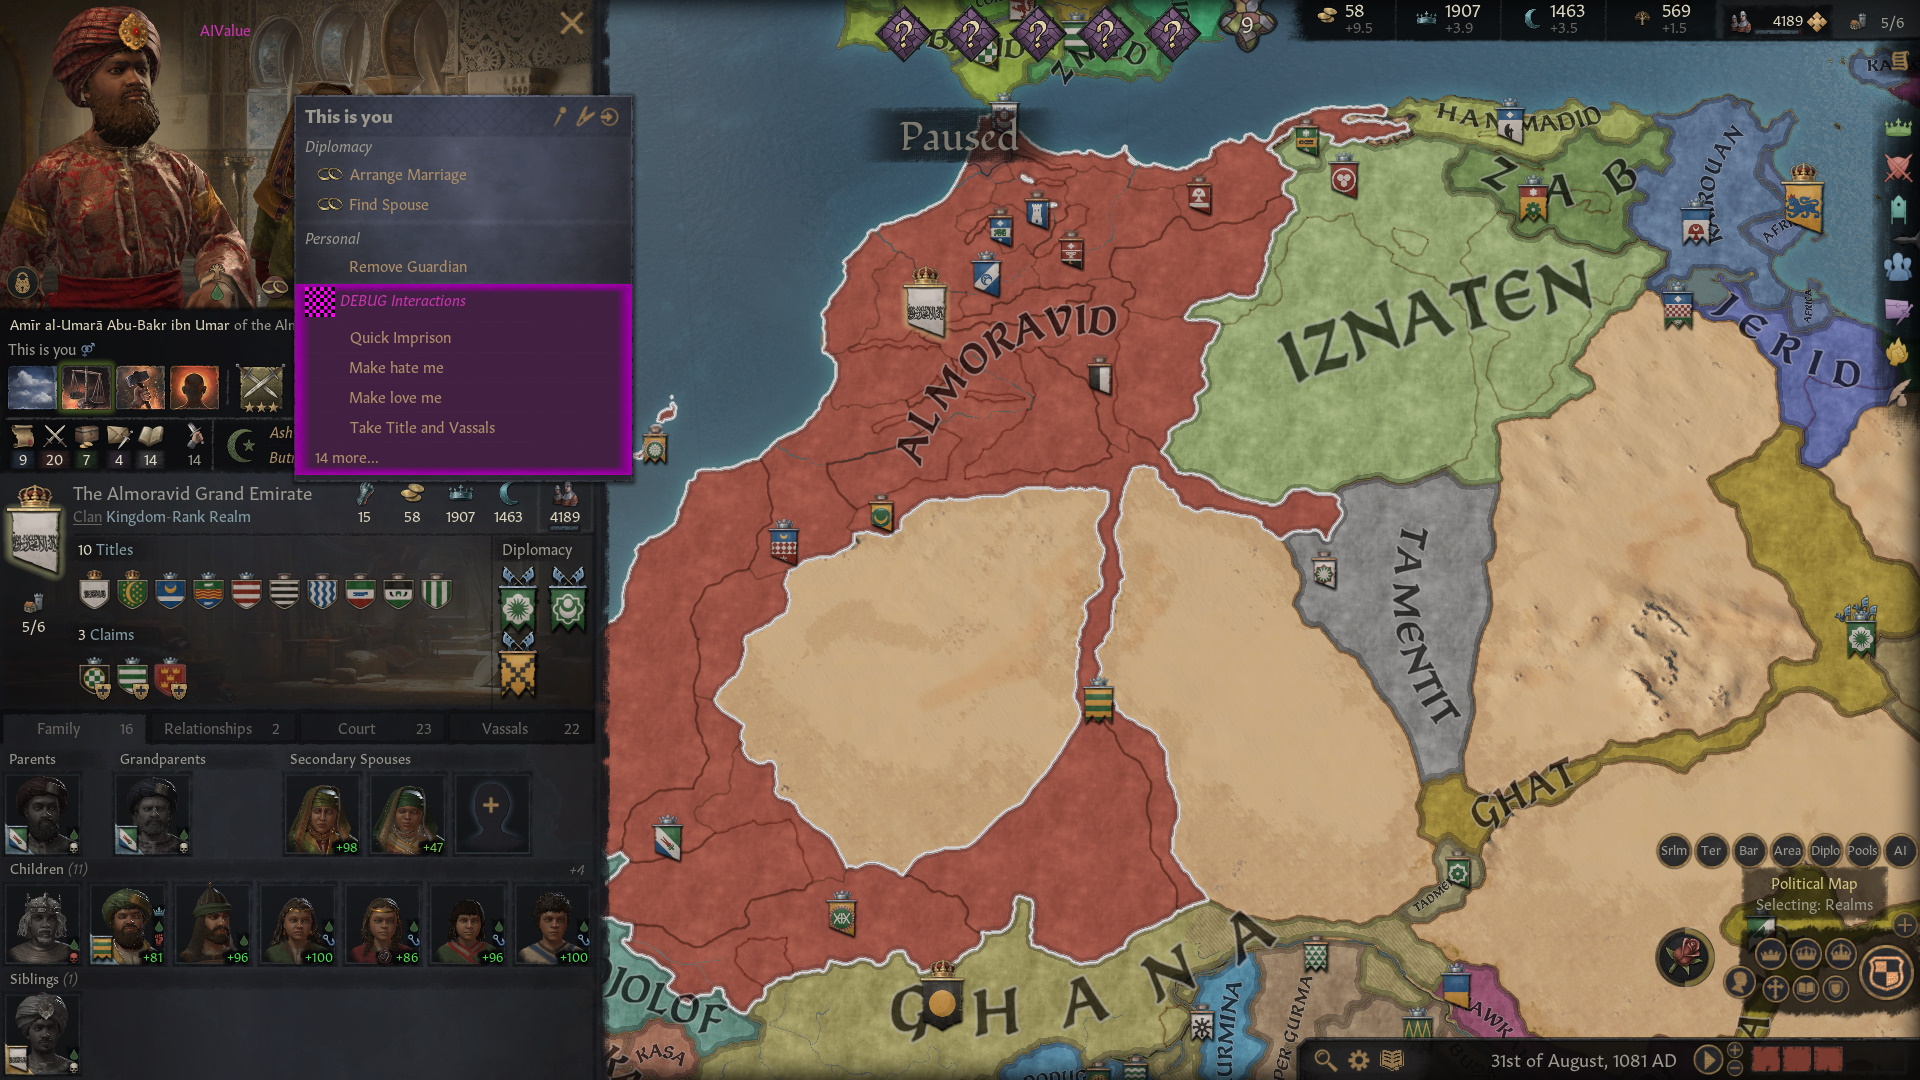 ck2 has stopped working